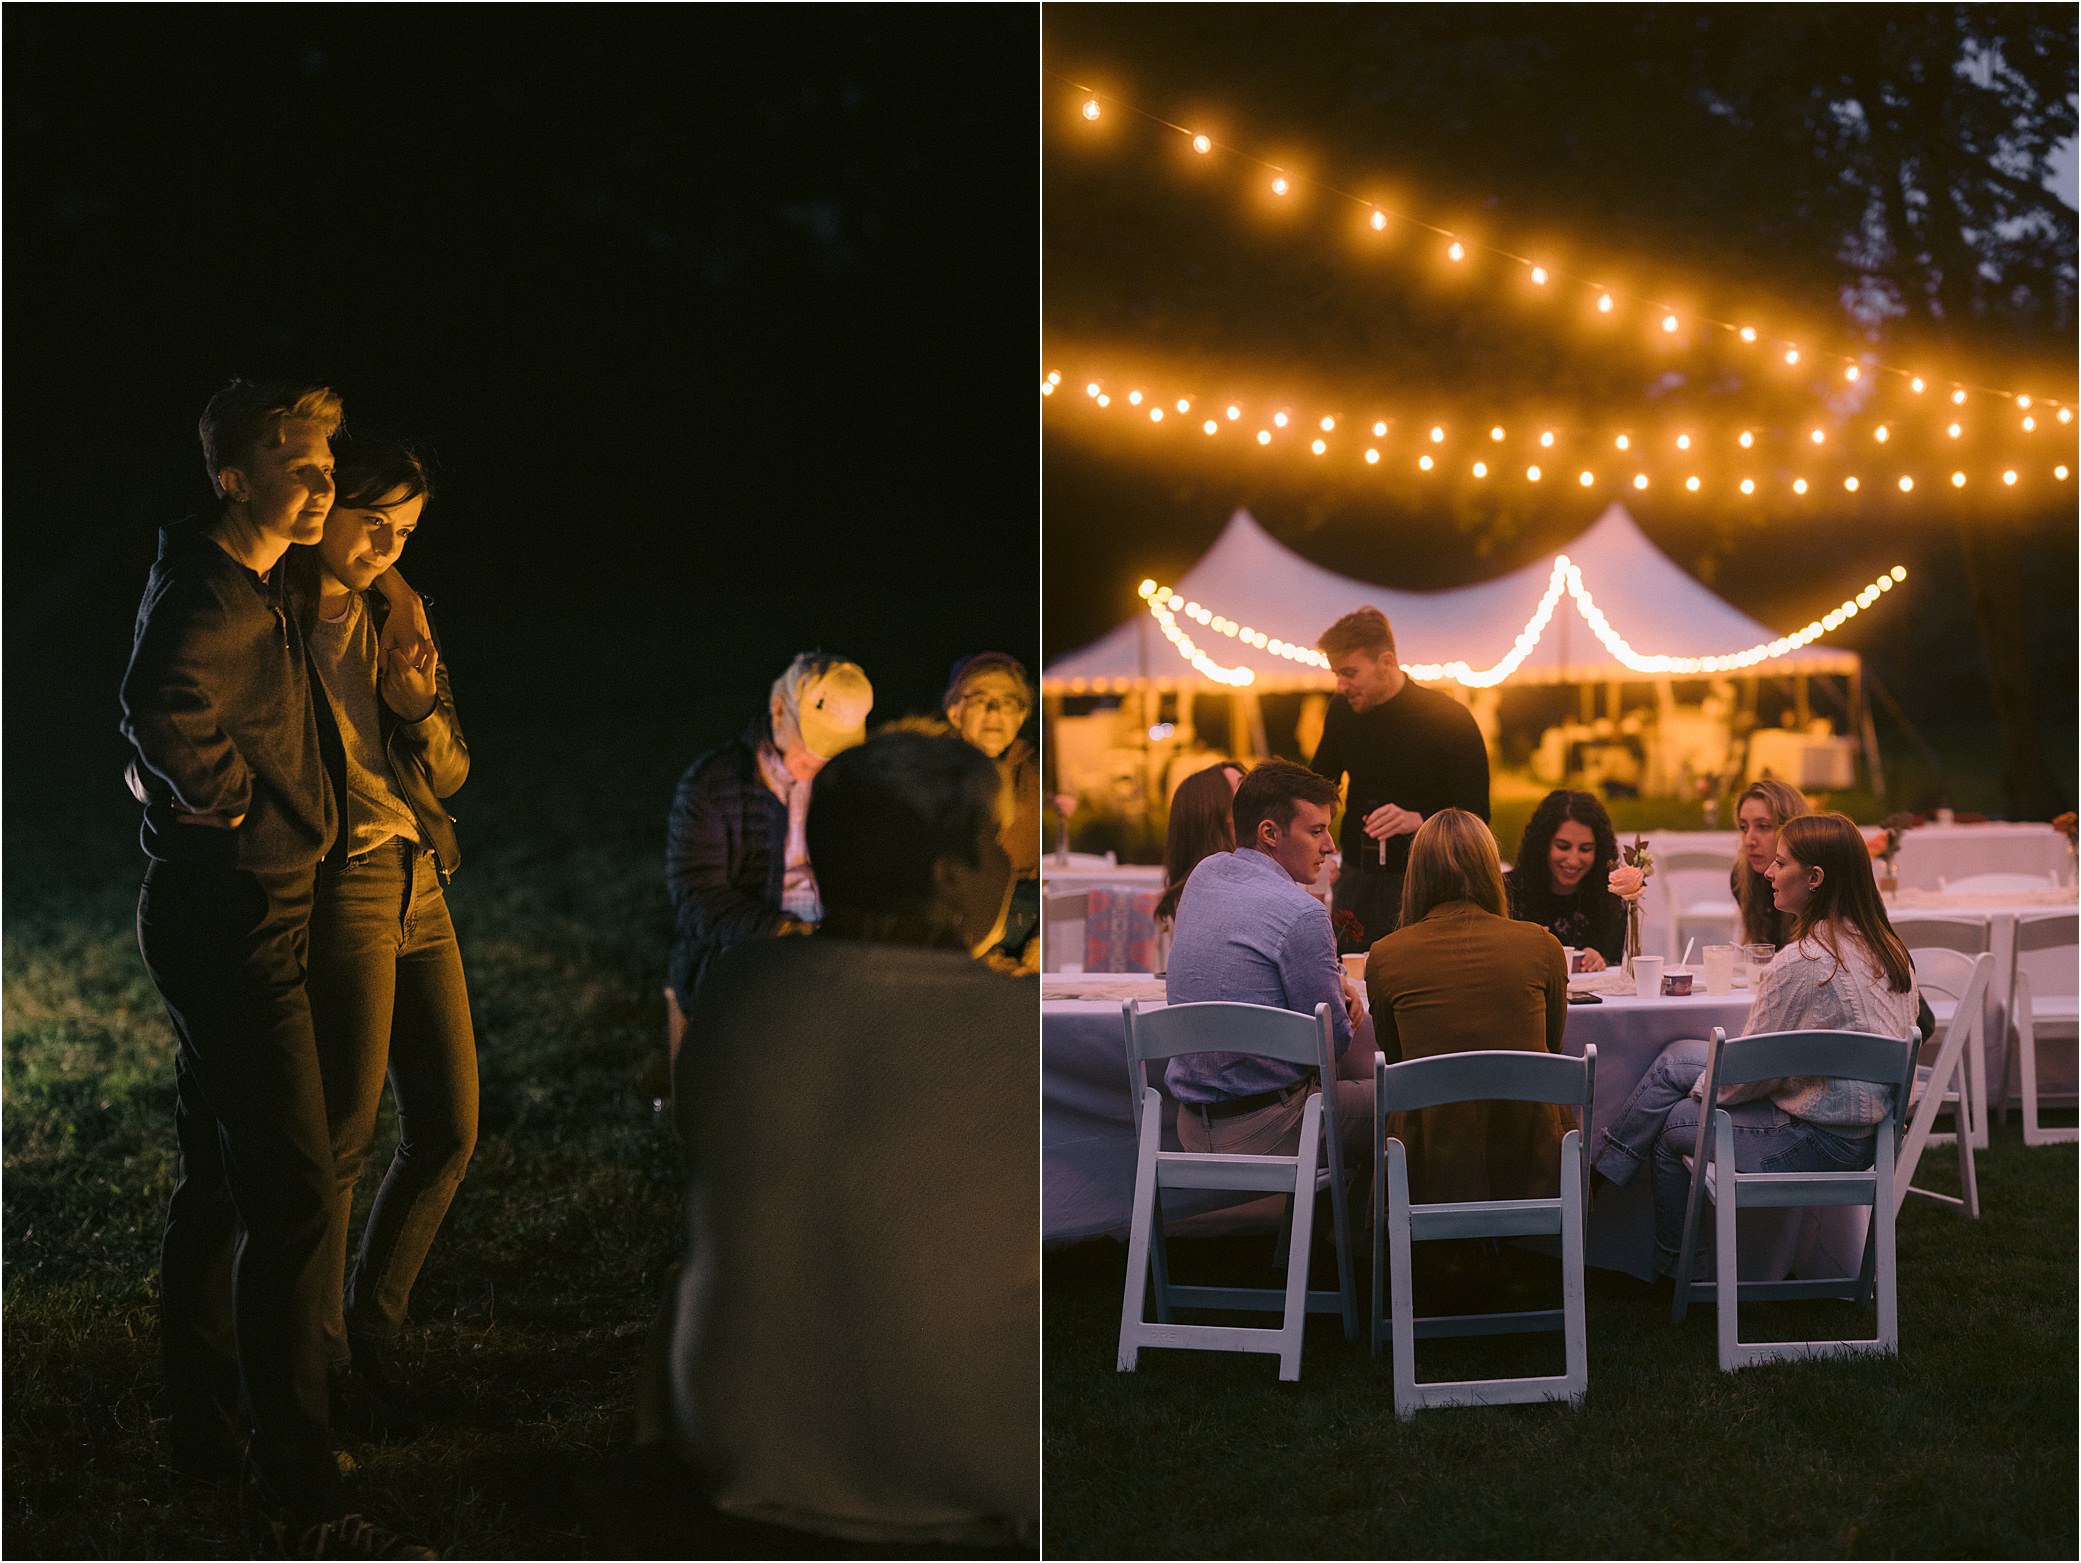 Strings of lights illuminate guests at long white tables during a backyard wedding reception.